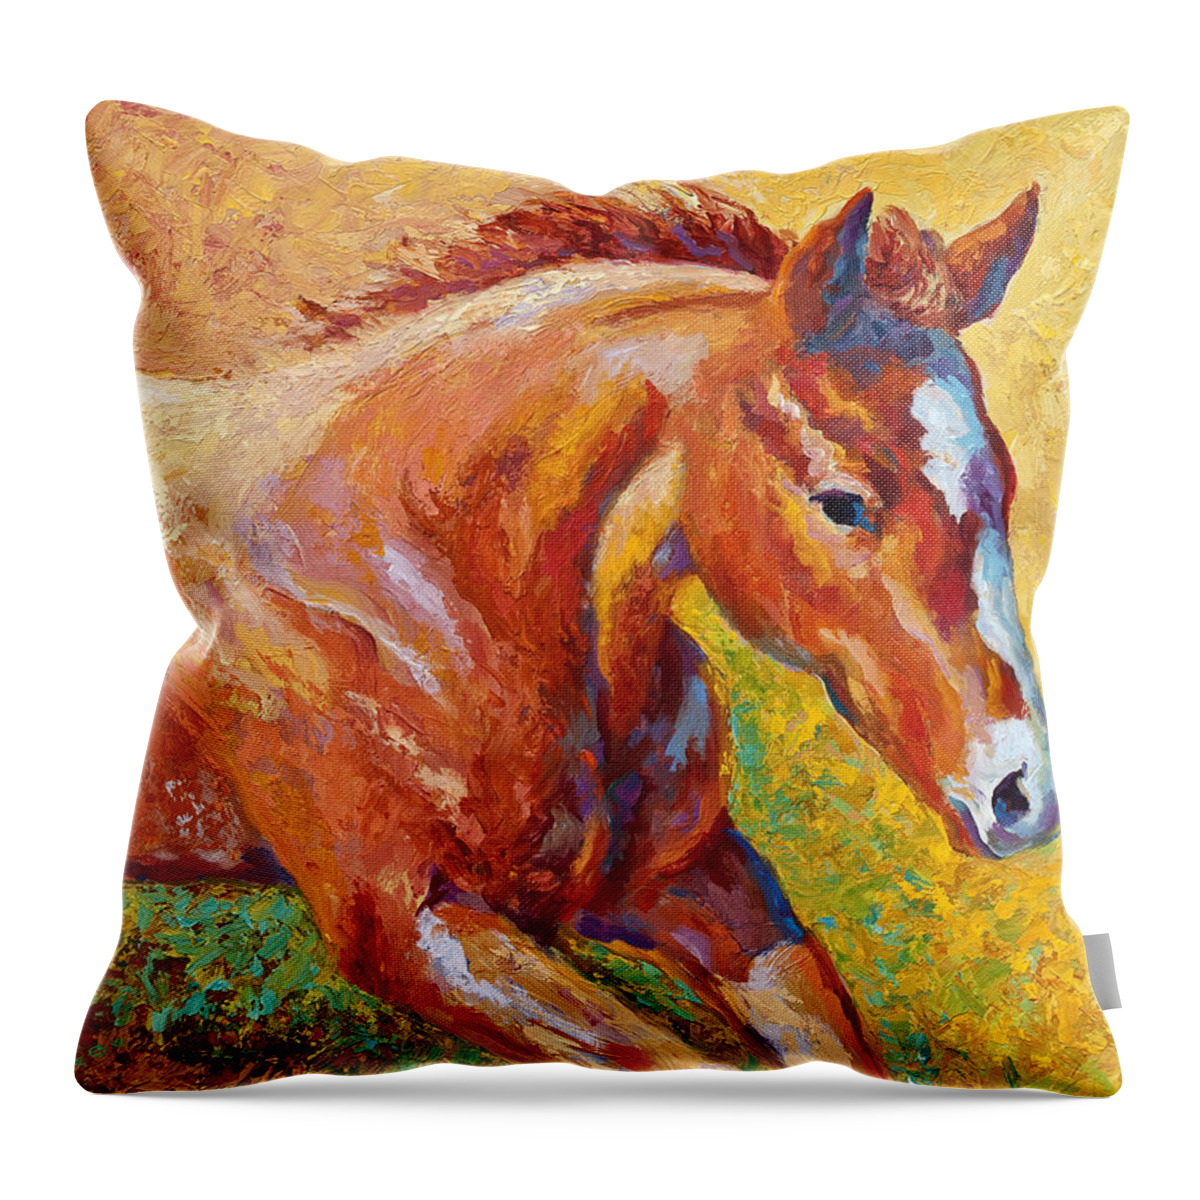 Horses Throw Pillow featuring the painting The Good Life by Marion Rose